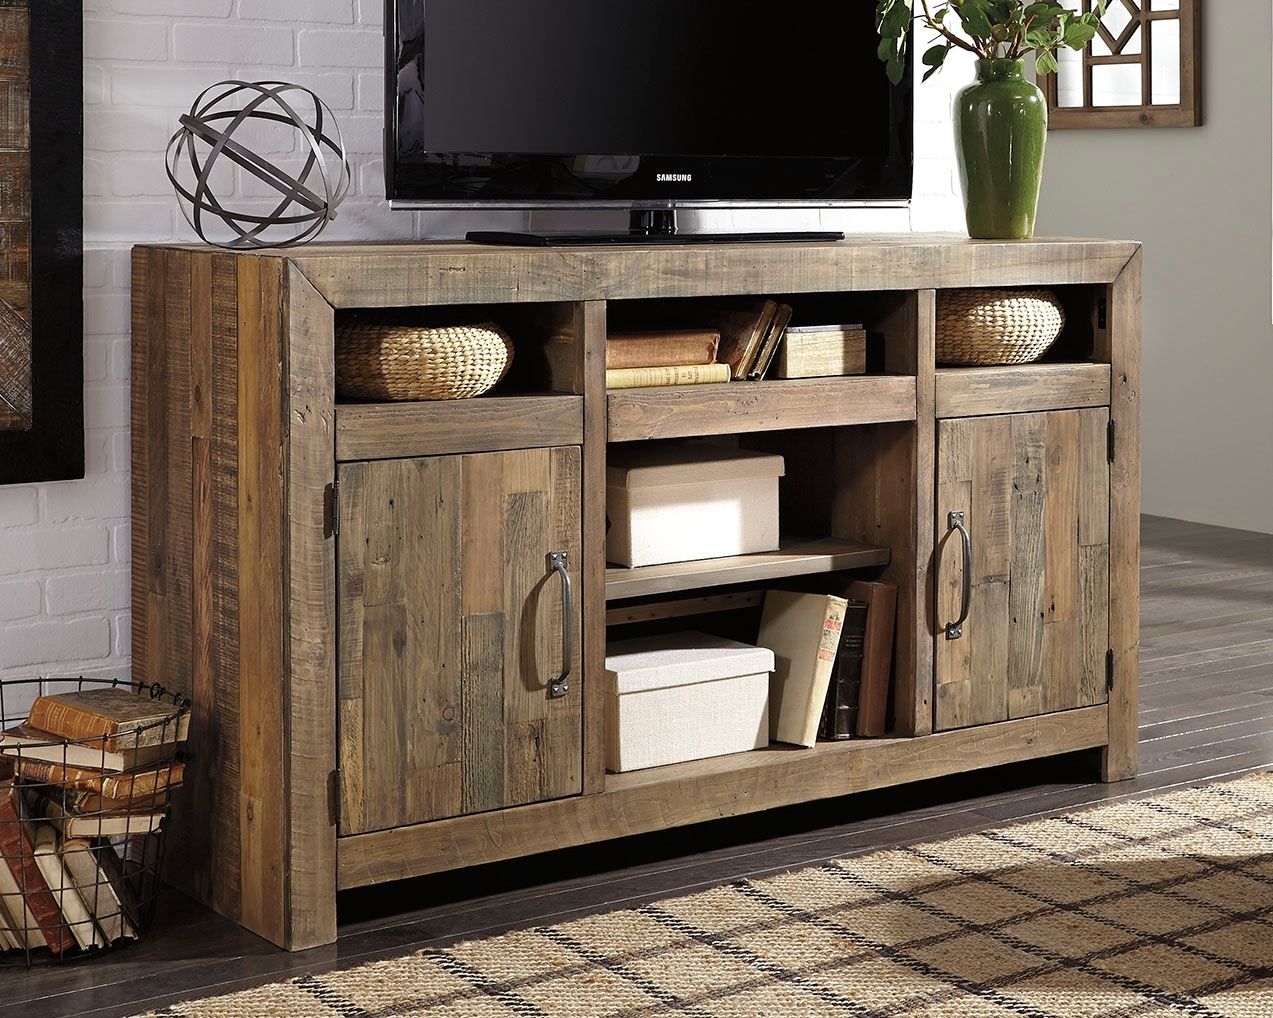 Sommerford - Brown - 62" TV Stand With Fireplace Insert Glass/Stone